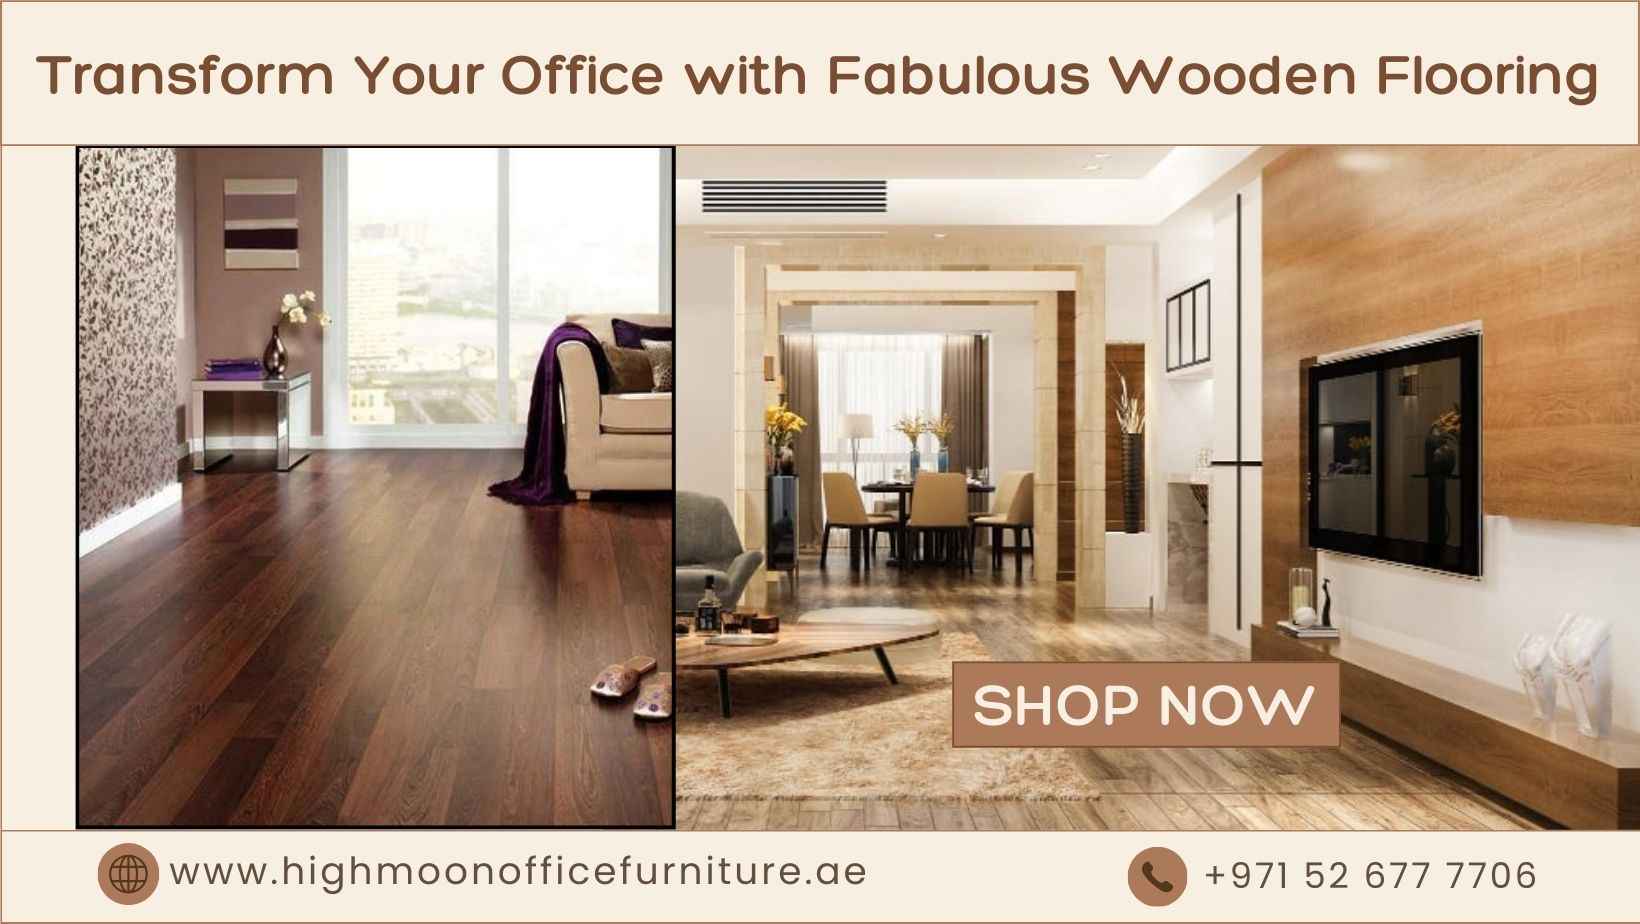 Bring the beauty of nature to your office room with our fabulous collection of wooden flooring